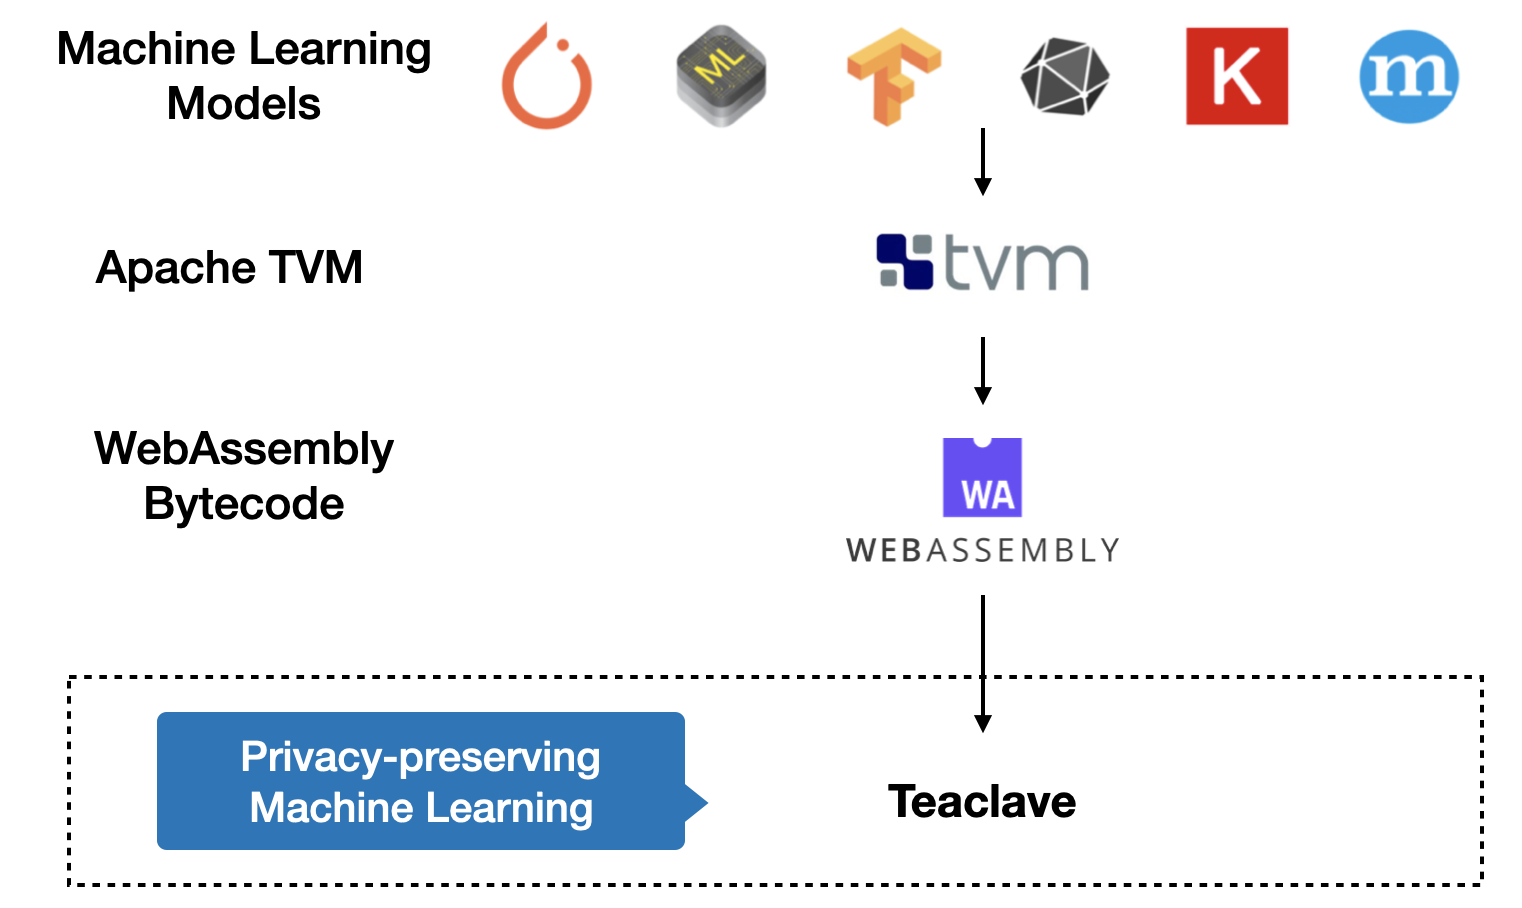 Using the WebAssembly executor for Machine Learning Inference with TVM